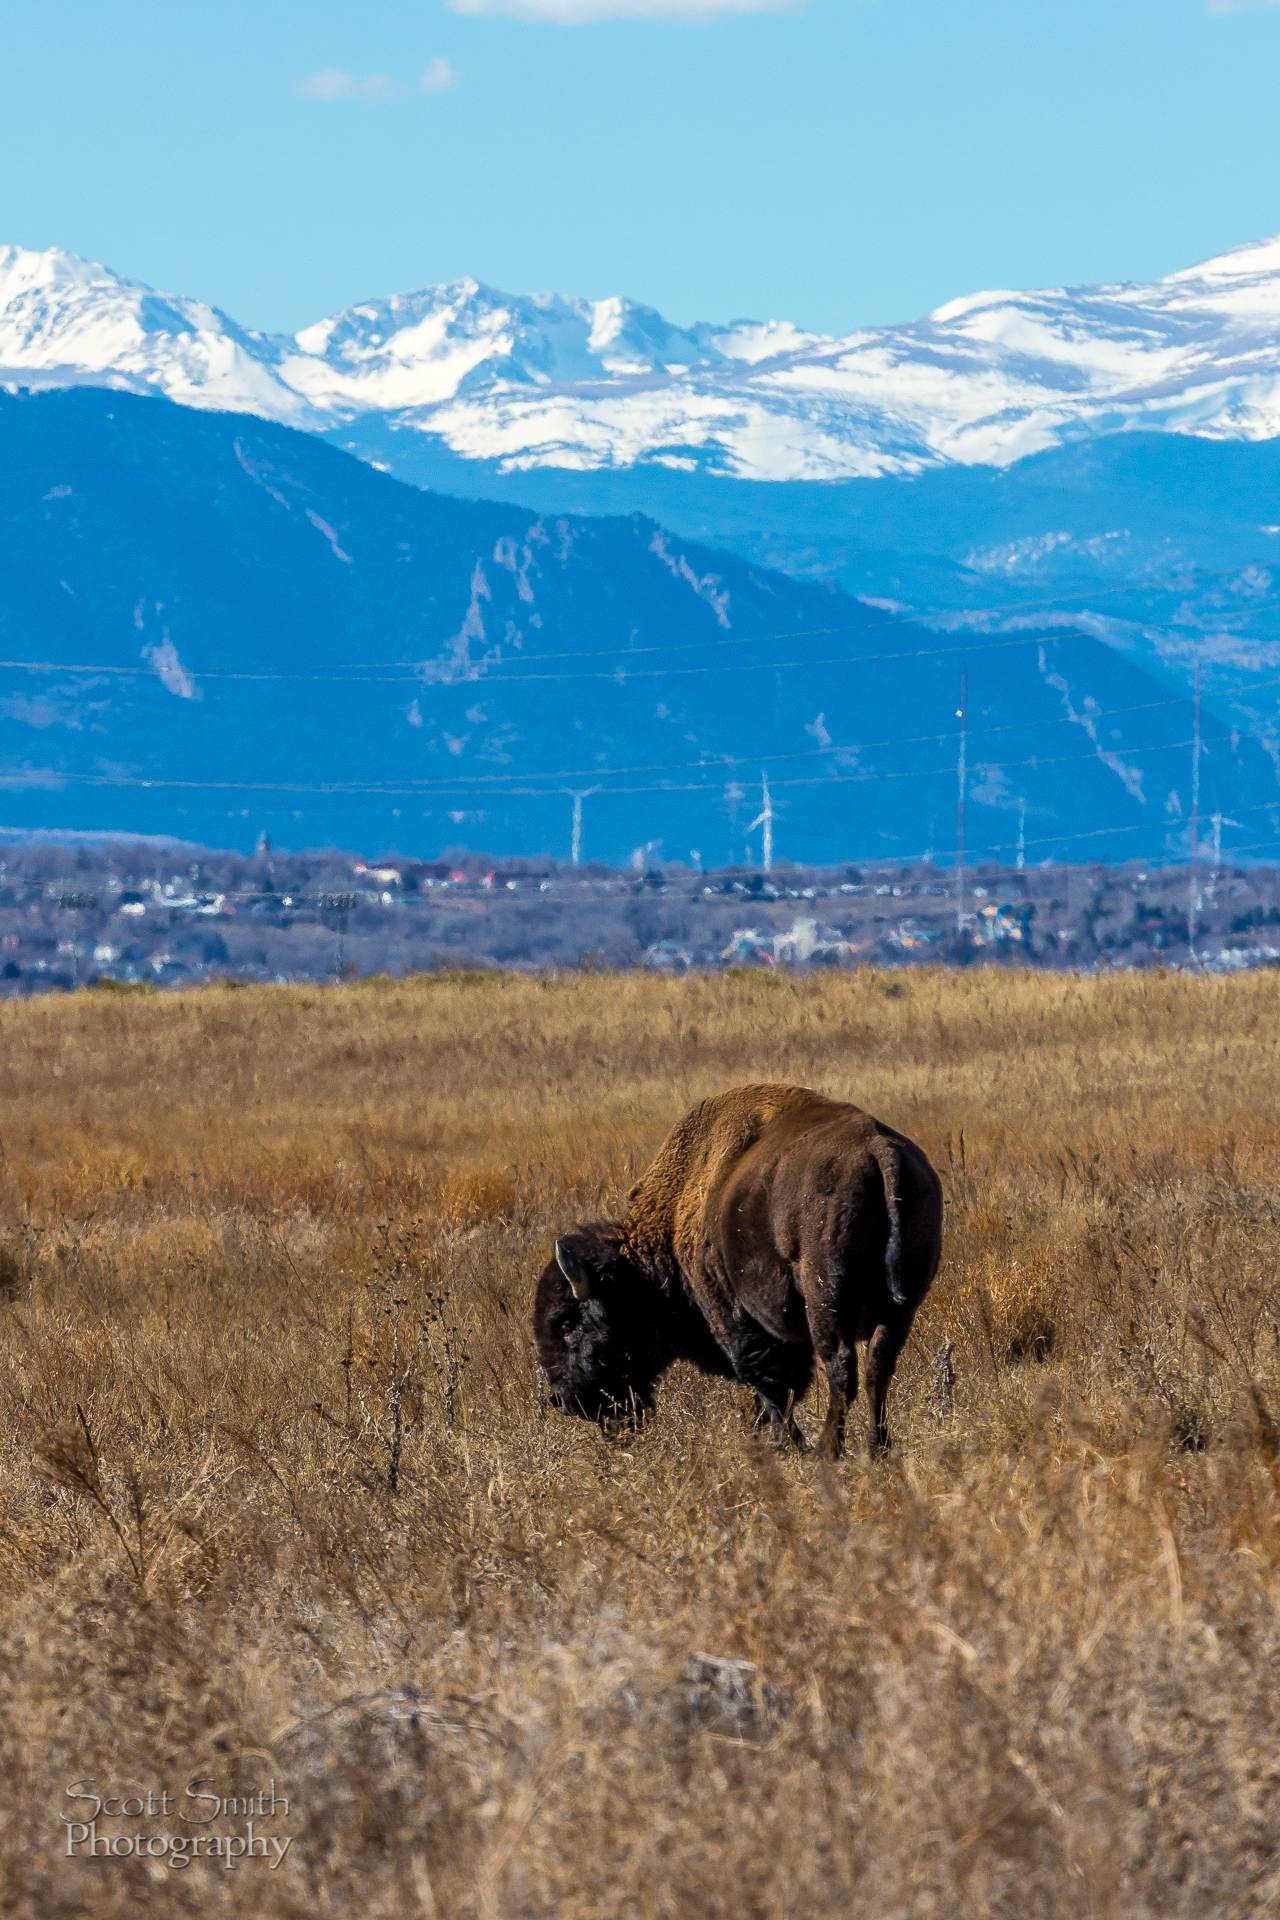 Bison 2 The bison with Rocky Flats and the wind generators near Boulder Colorado in the distance. by Scott Smith Photos